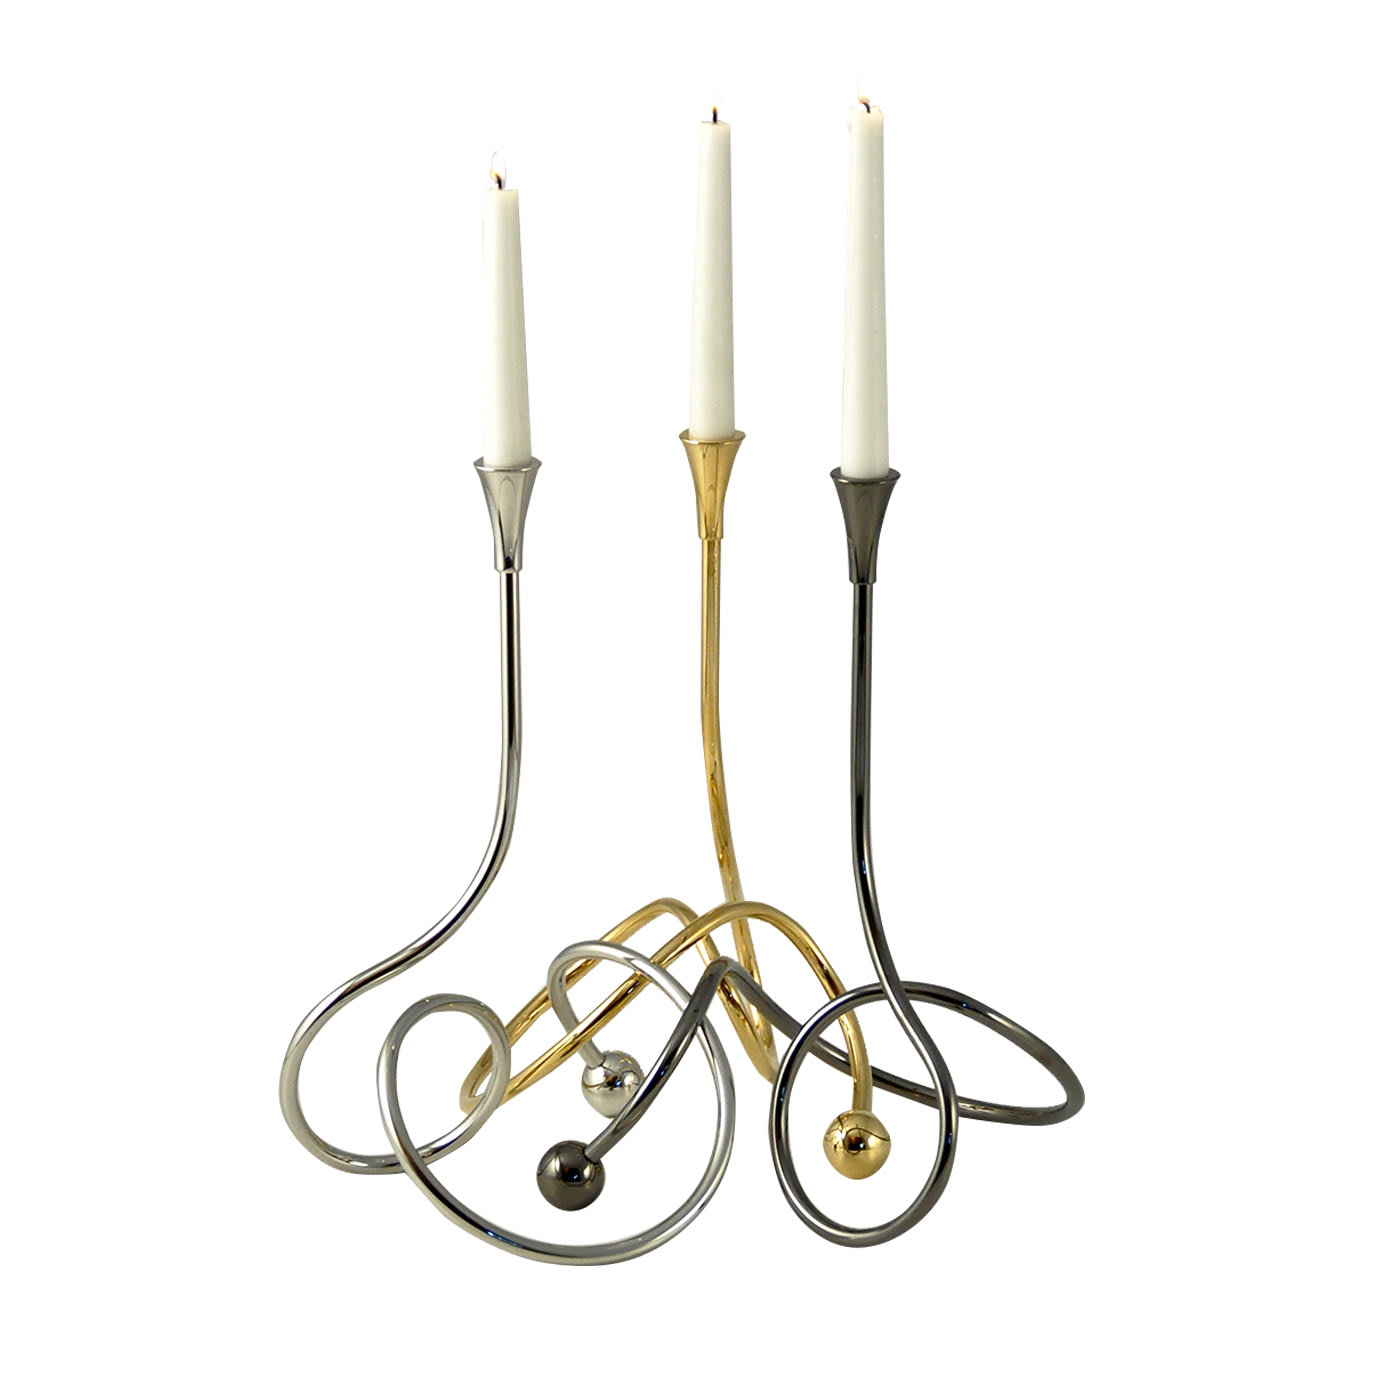 Malibù Set of 3 Candle Holders - Guido Niest